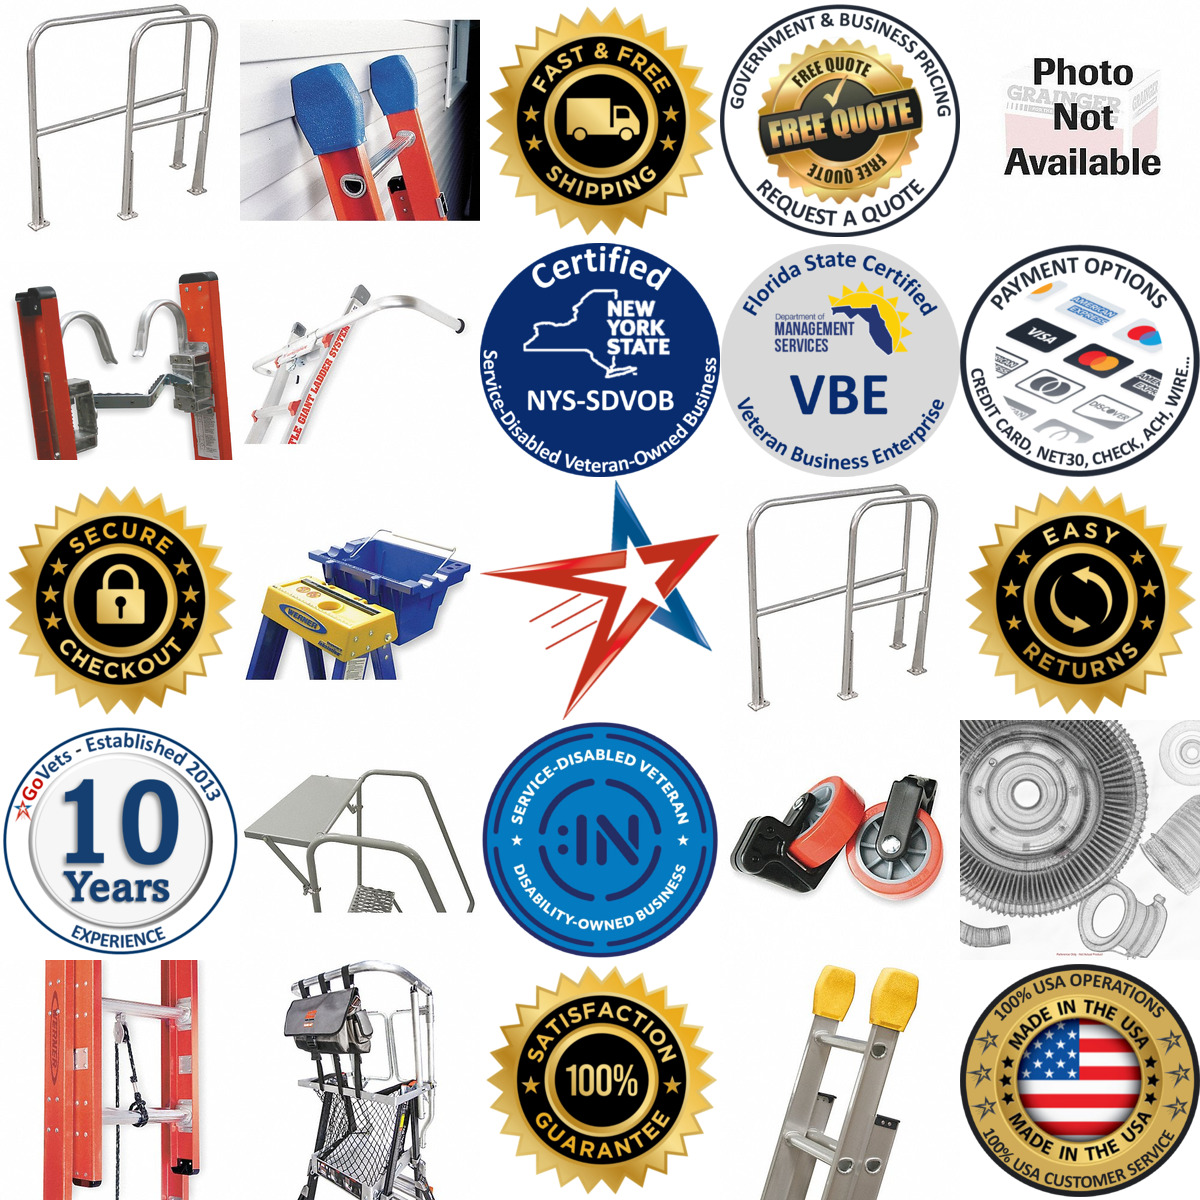 A selection of Ladder Accessories products on GoVets